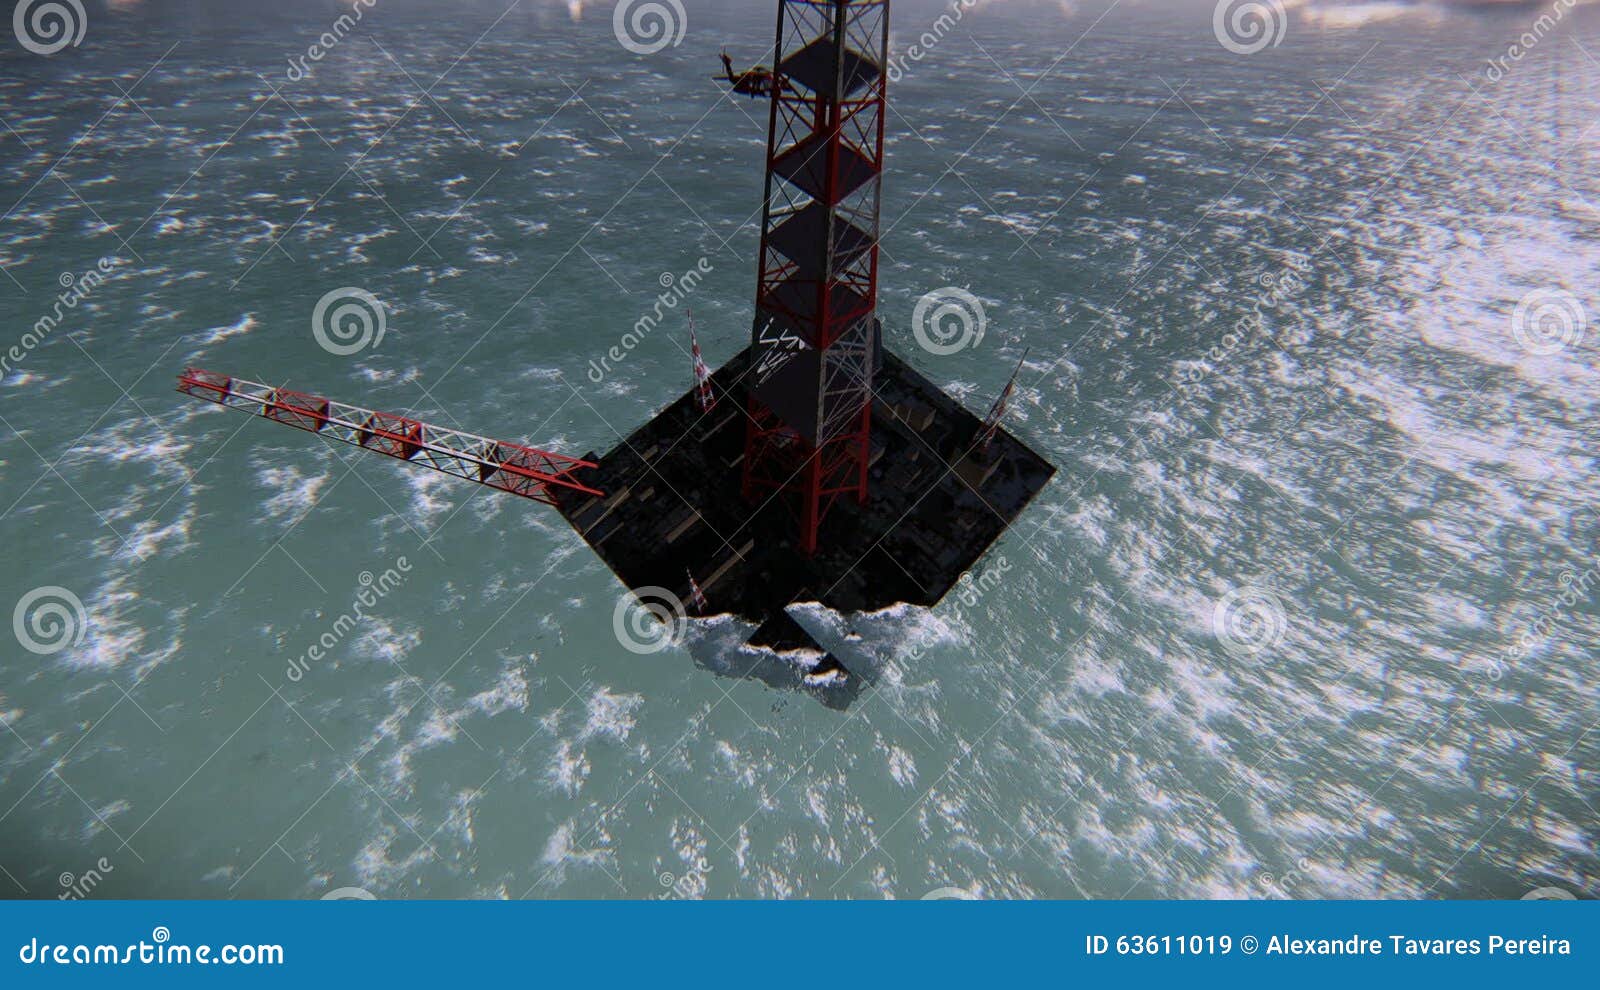 Oil Rig Sinking Video Footage Stock Video Video Of Sinking